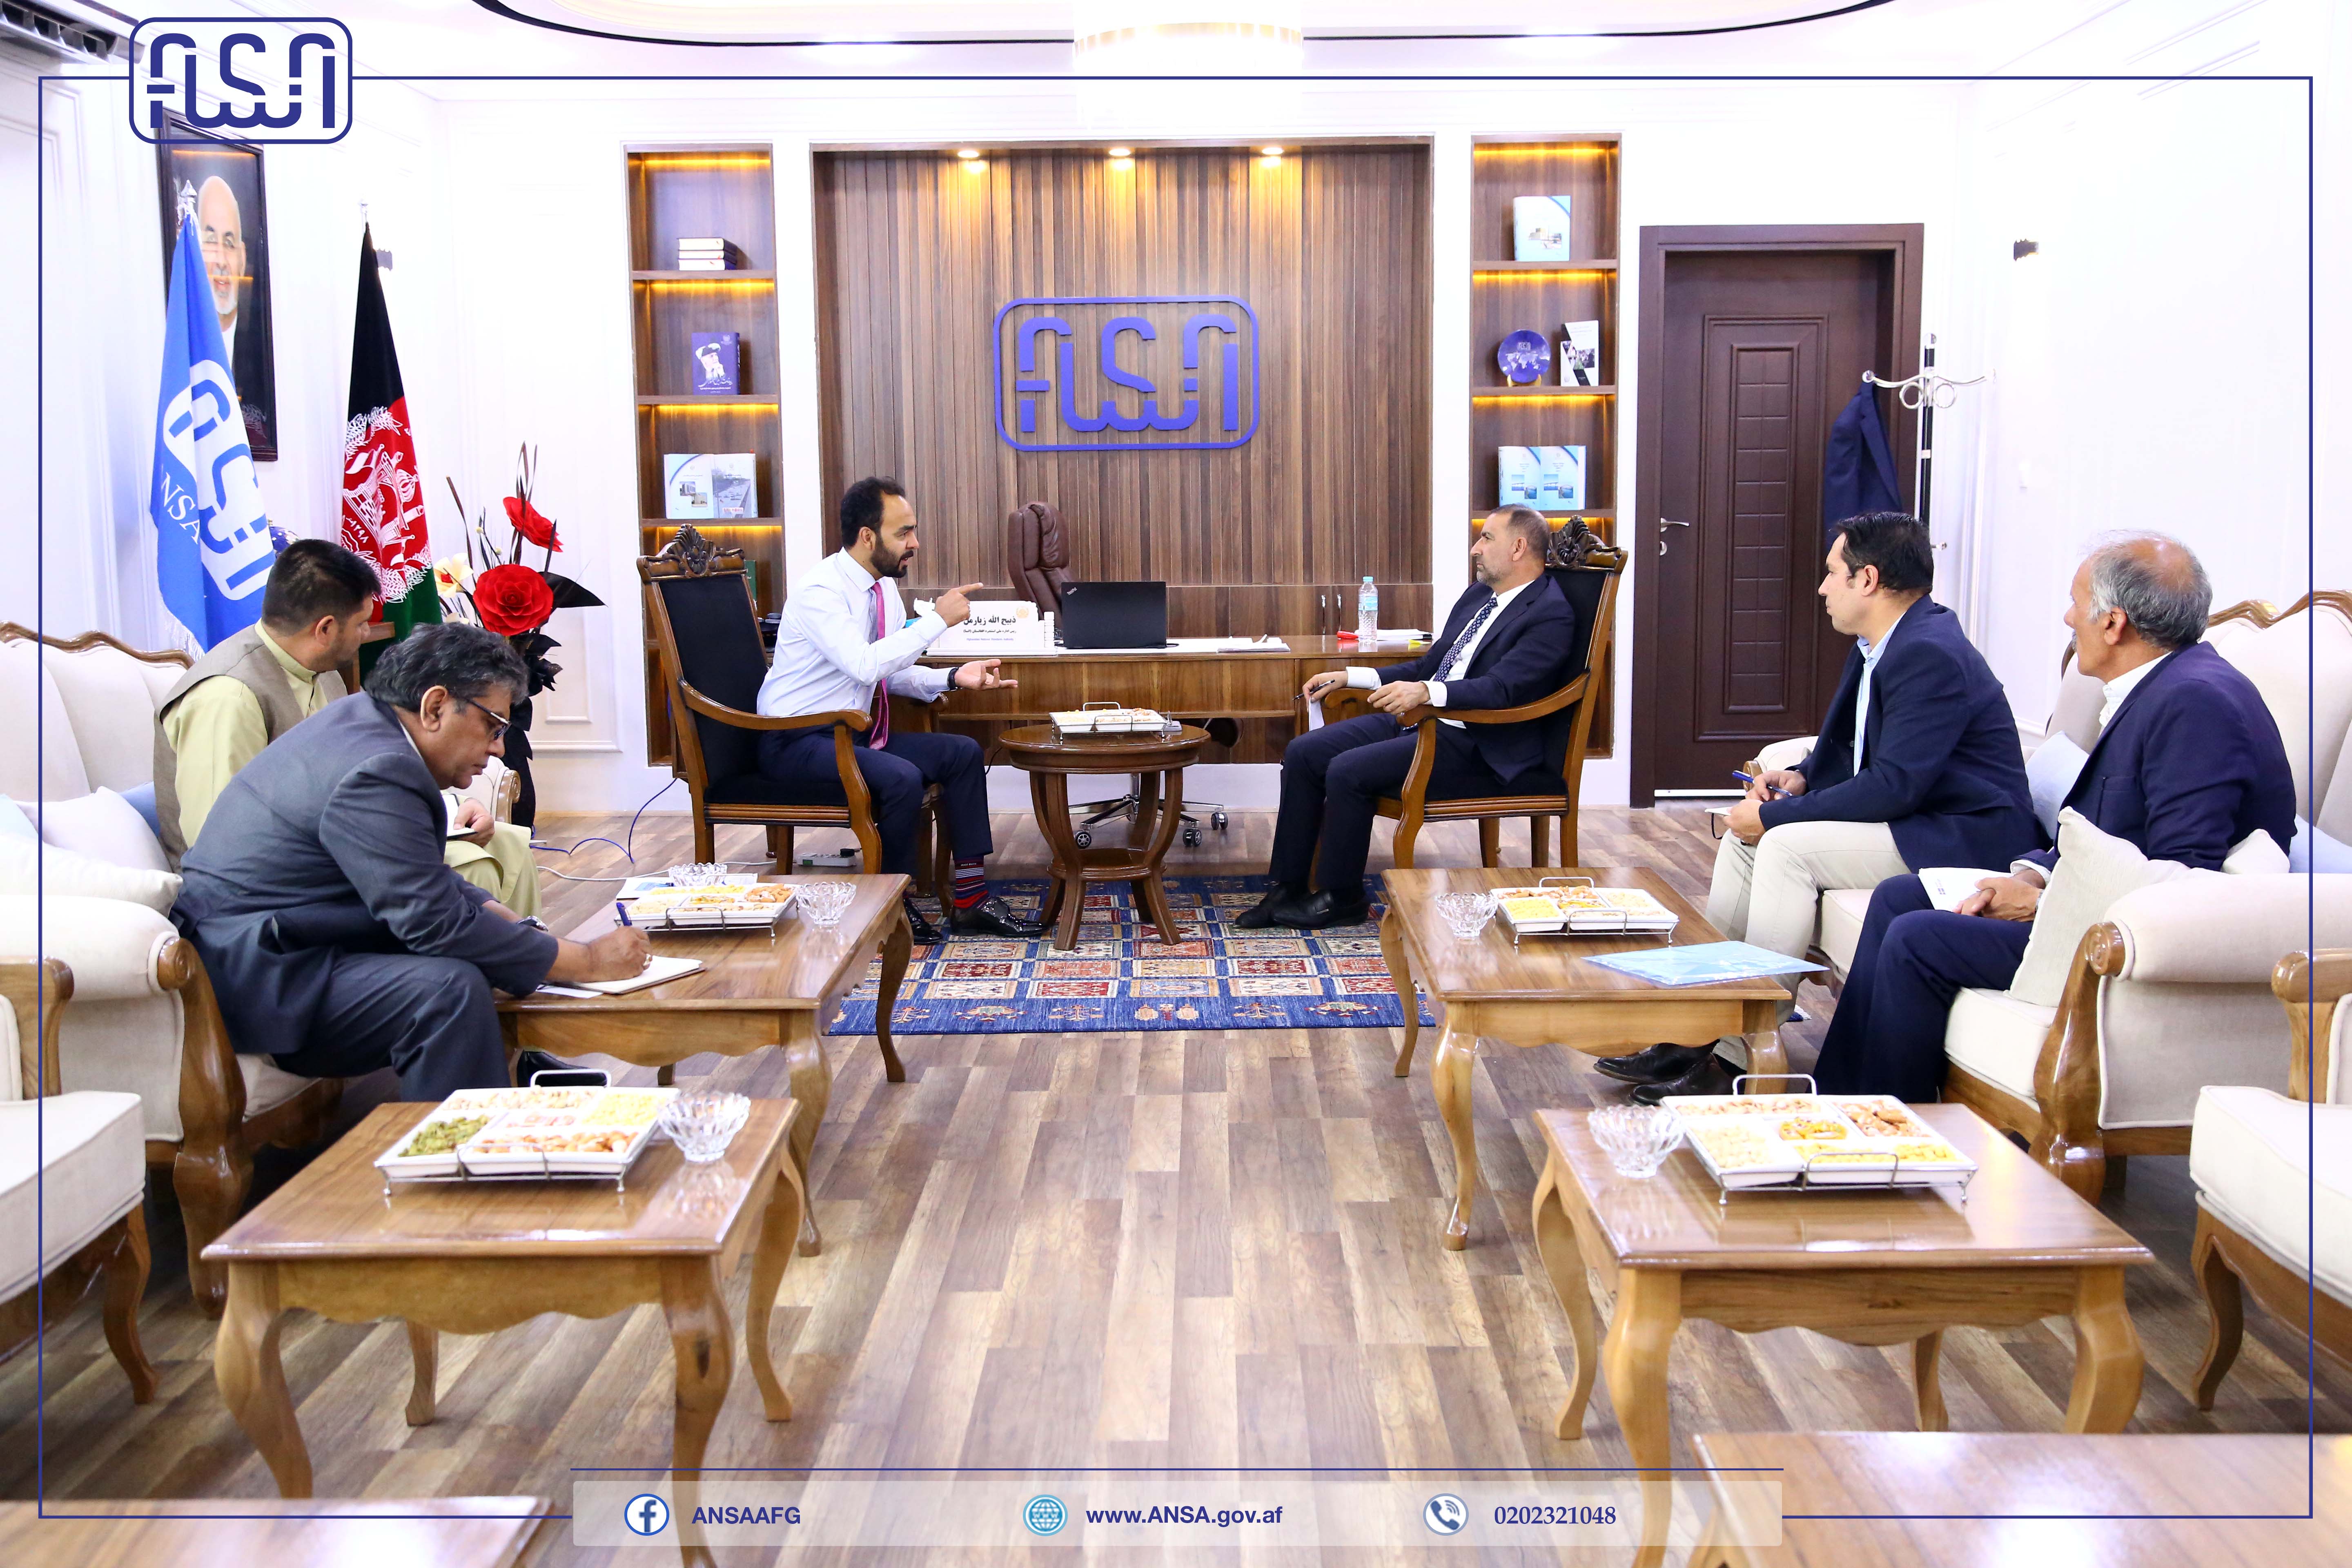 Afghanistan National Standards Authority’s director general meets the chairmen of Afghanistan chamber of industries and mines.